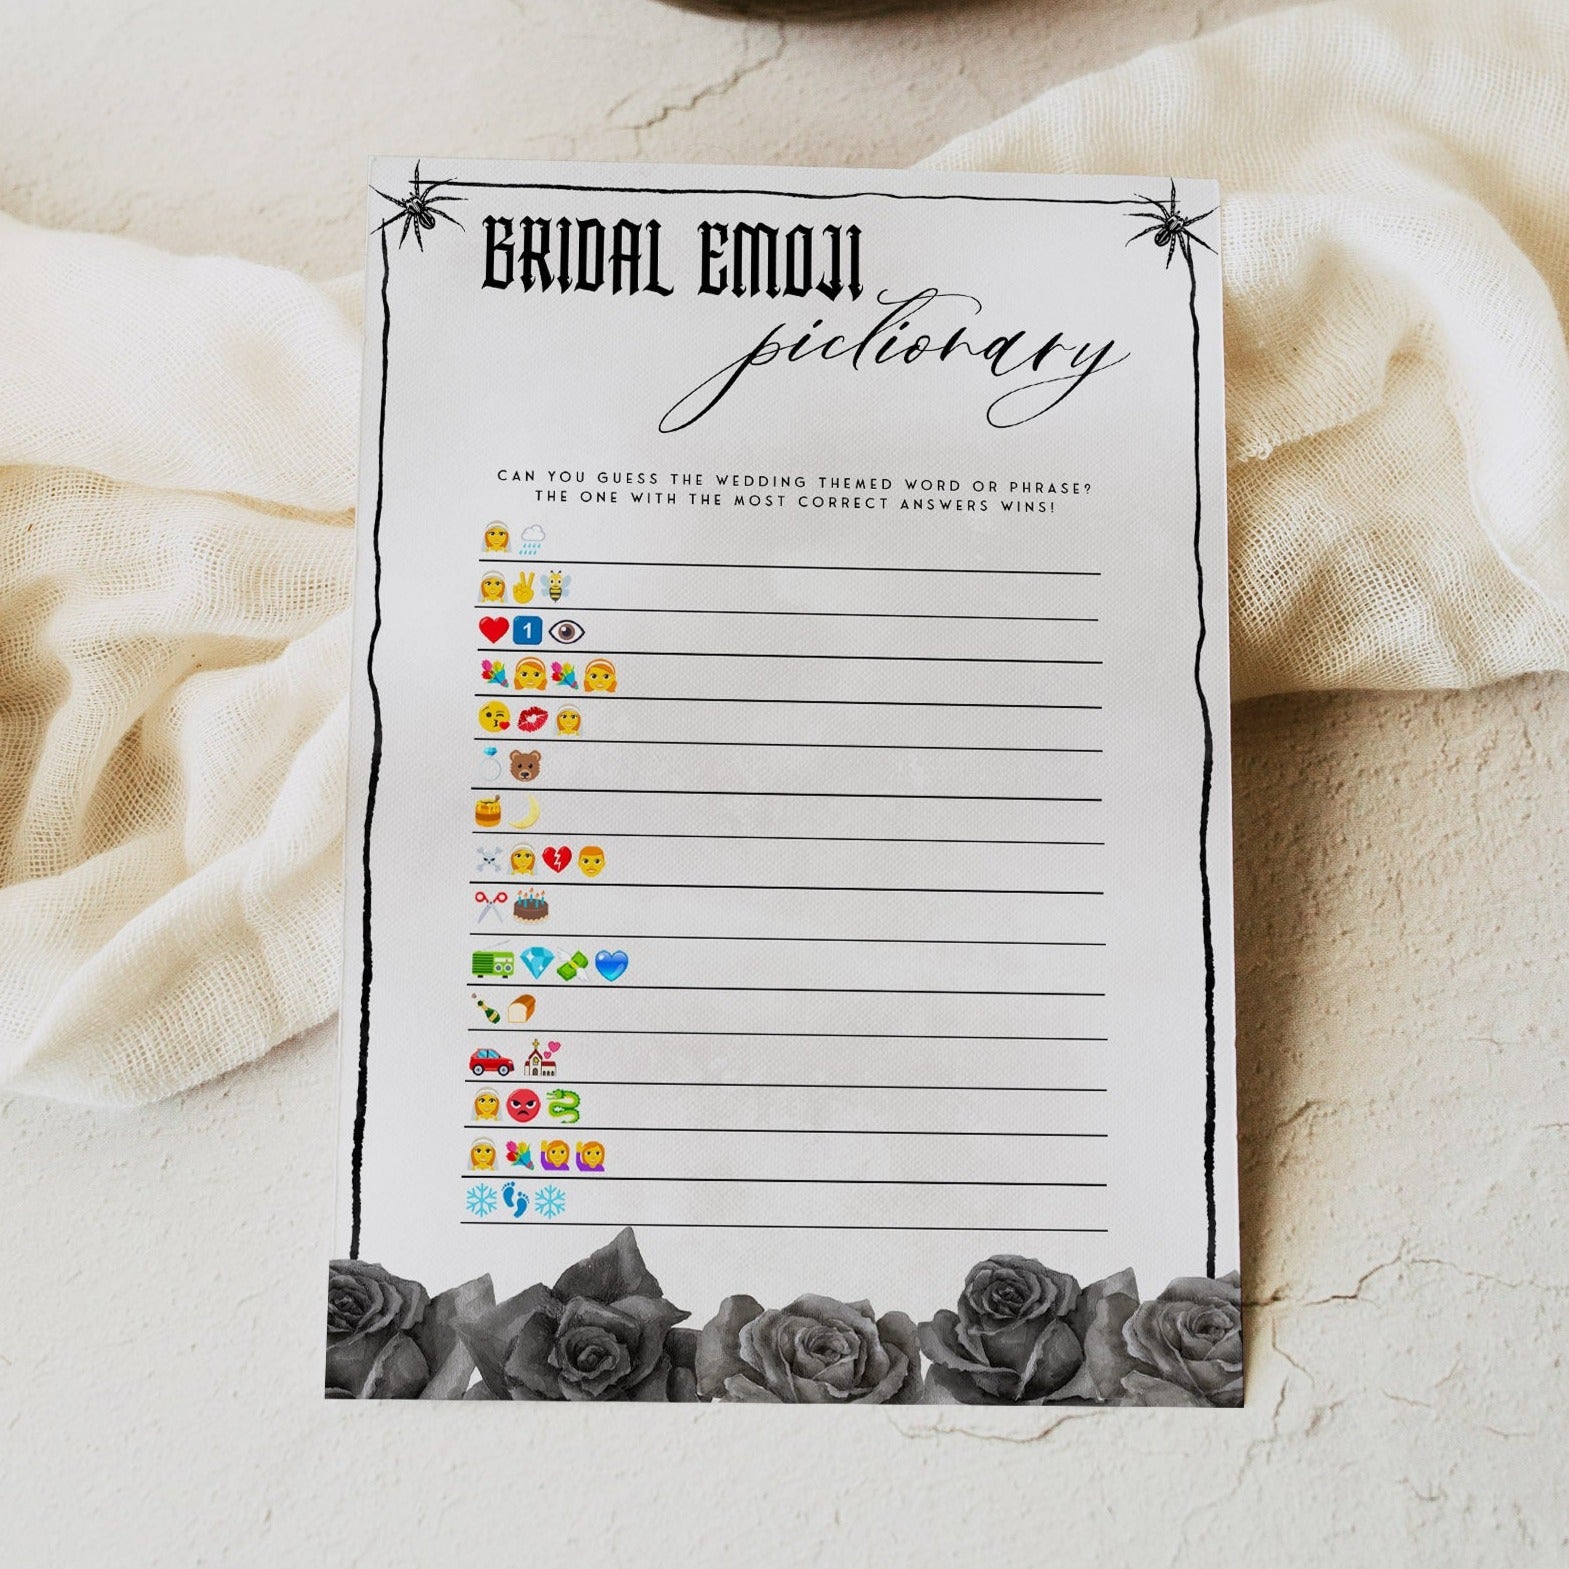 Fully editable and printable bridal emoji pictionary game with a gothic design. Perfect for a Bride or Die or Death Us To Party bridal shower themed party